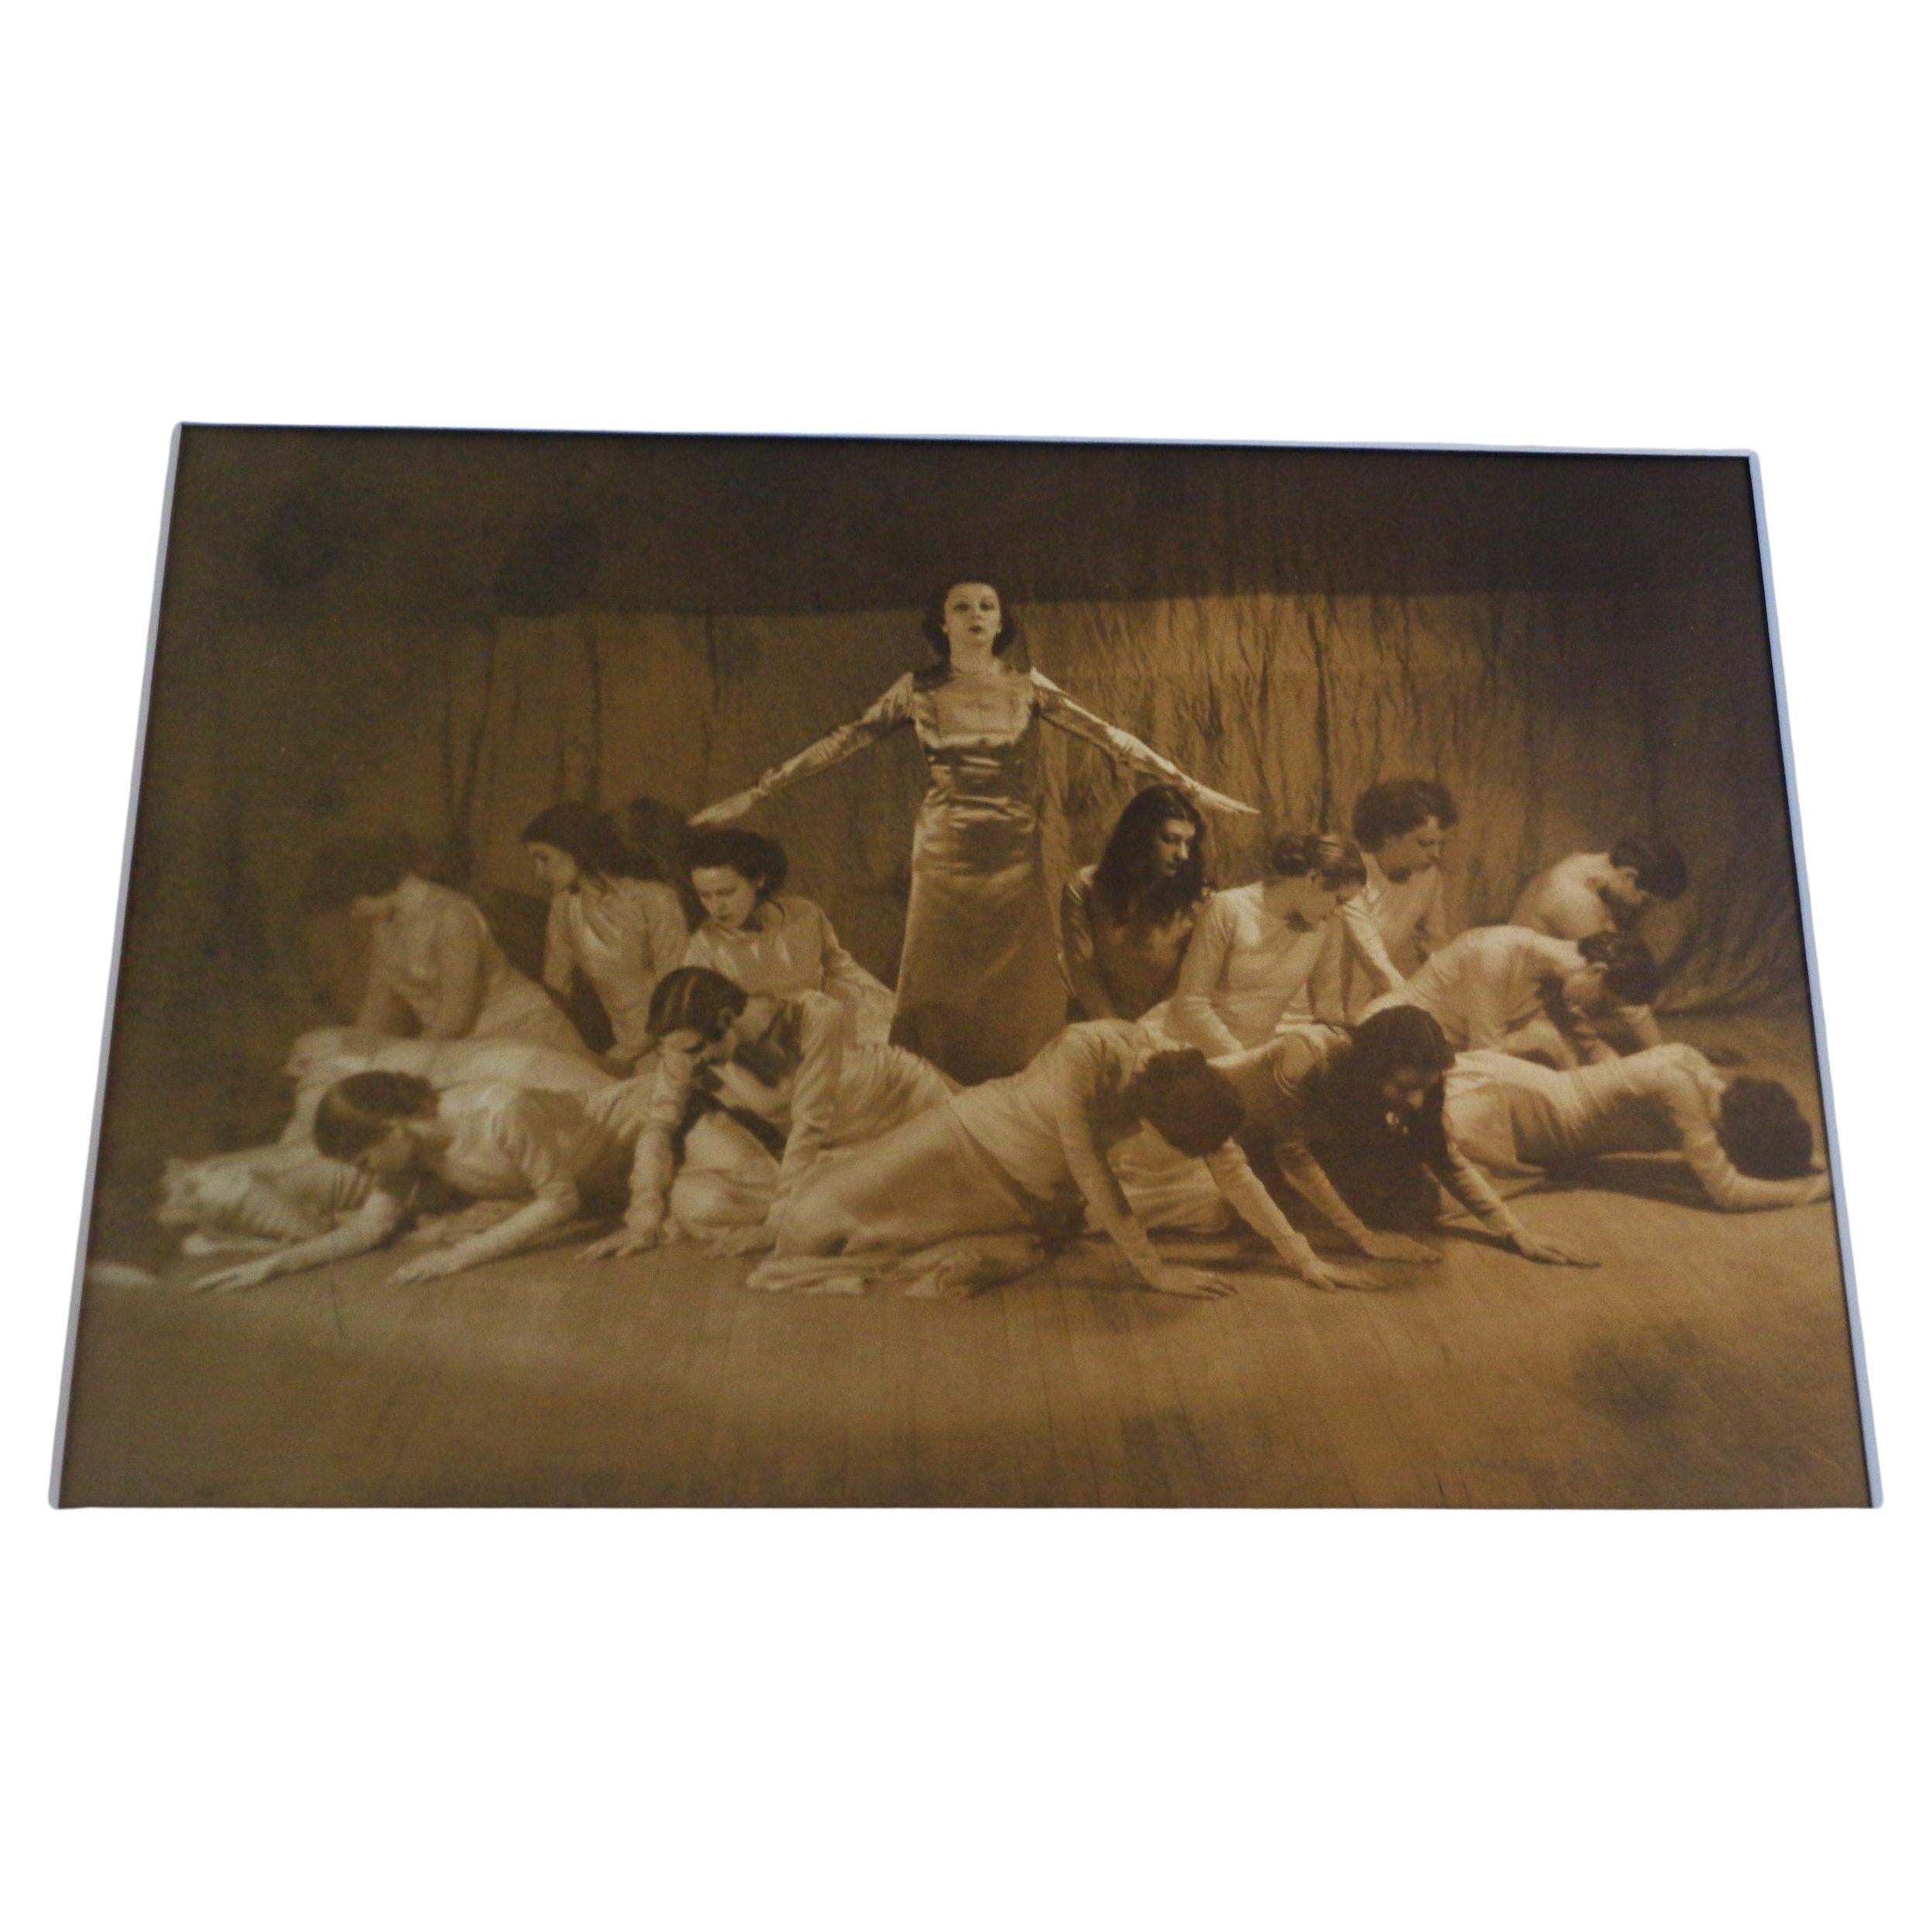 Early 20th Century Pictorialist Sepia Tone Gelatin Silver Print Photograph Avant Garde Dance Troup For Sale